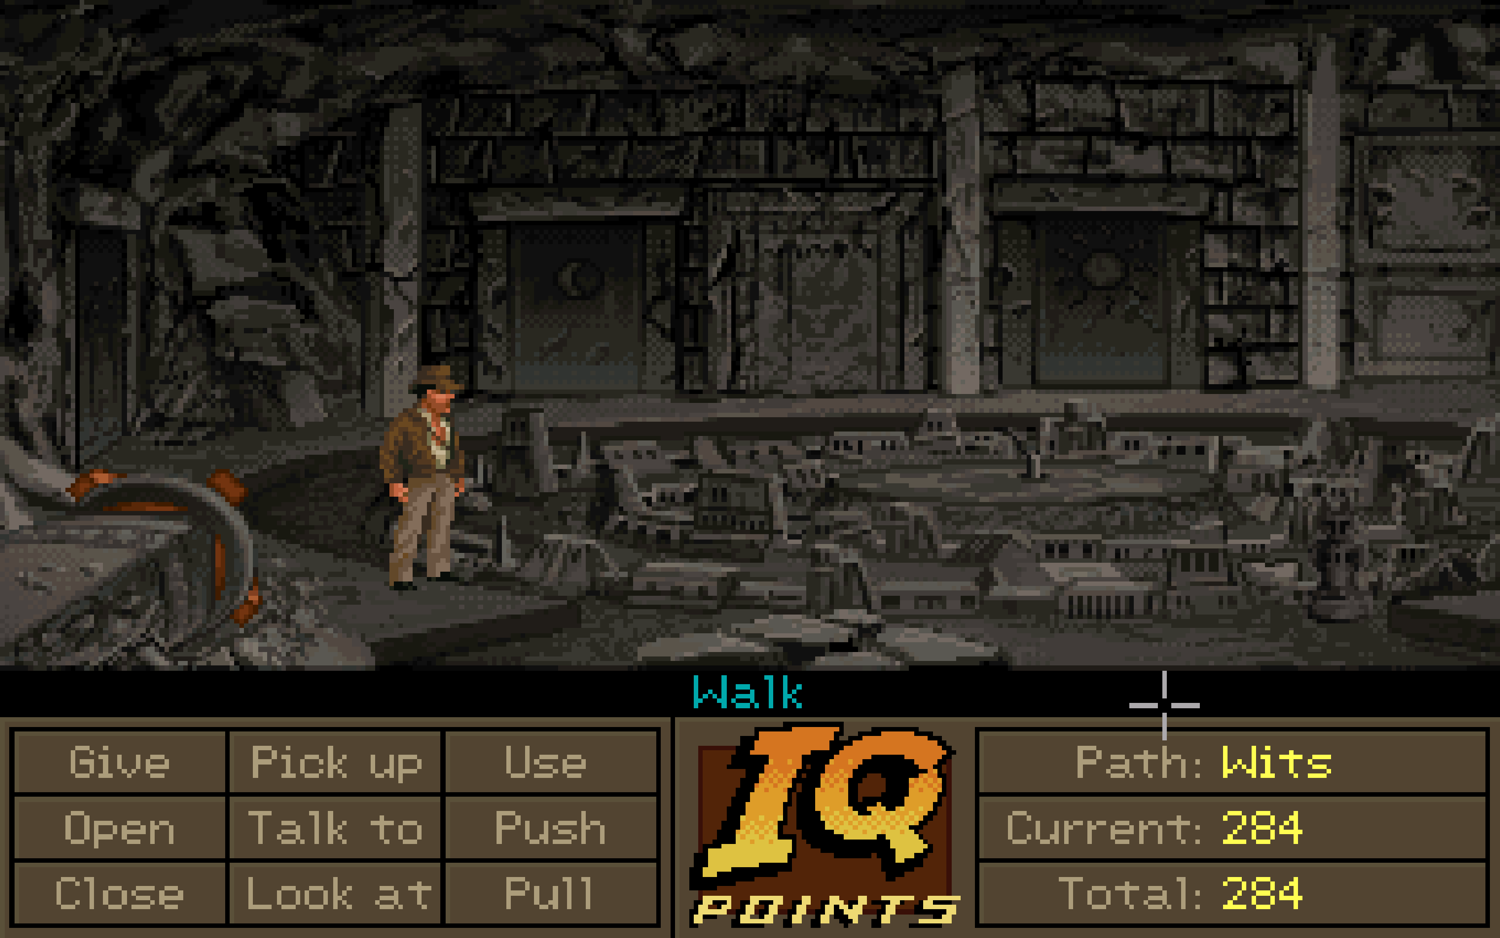 Screenshot of Indiana Jones and the Fate of Atlantis. Indy is in Atlantis, and at the bottom the IQ points of the current path are being displayed.